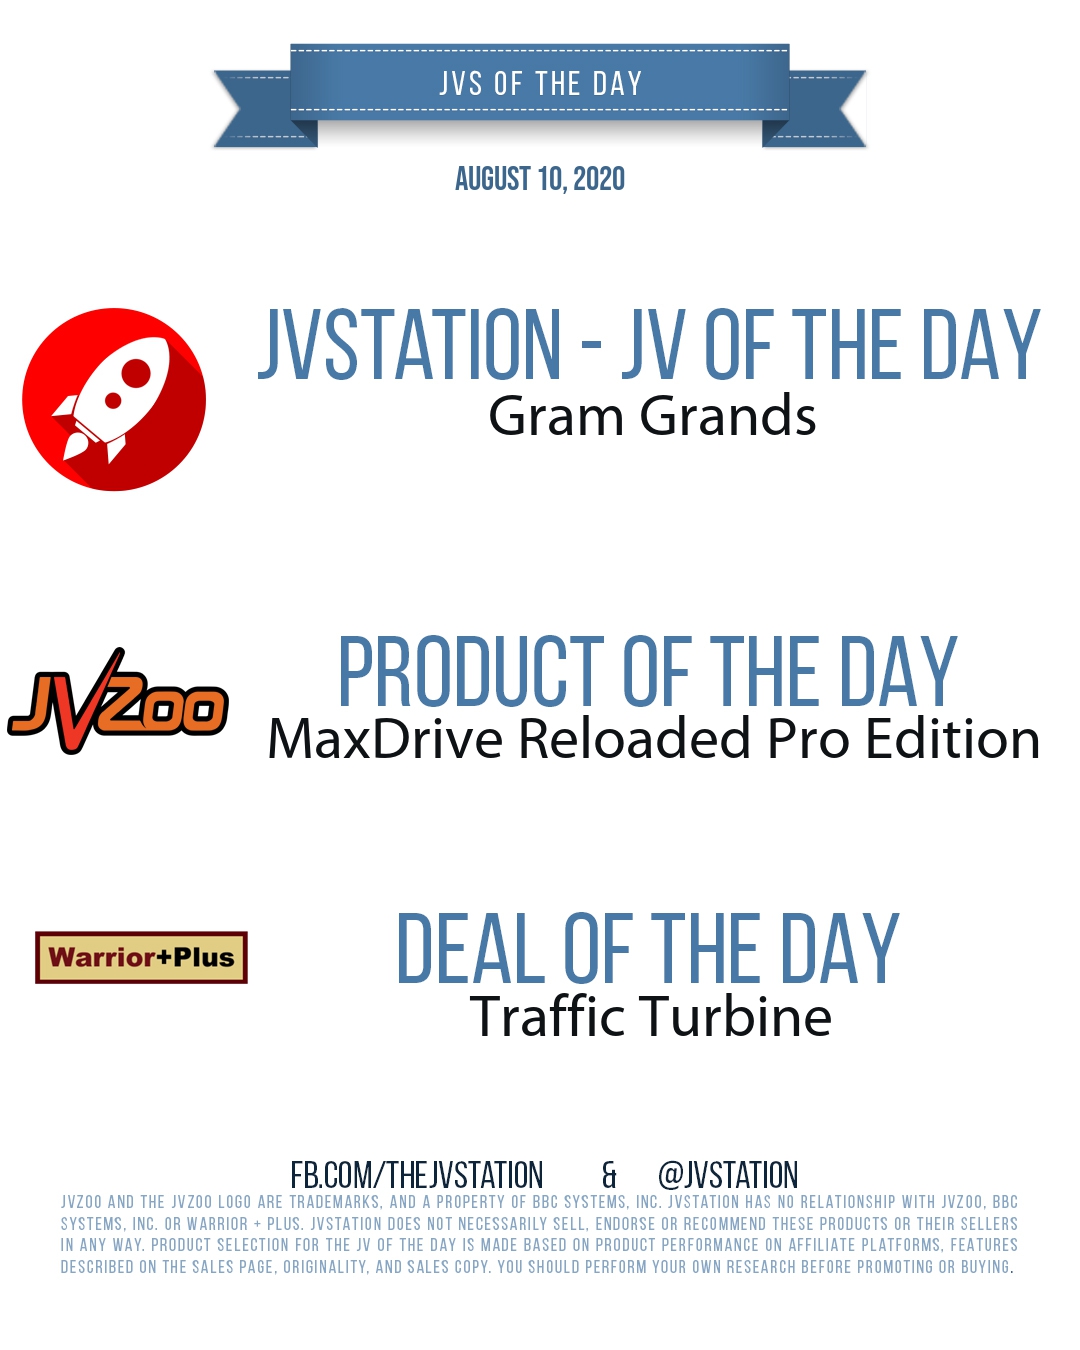 JVs of the day - August 10, 2020